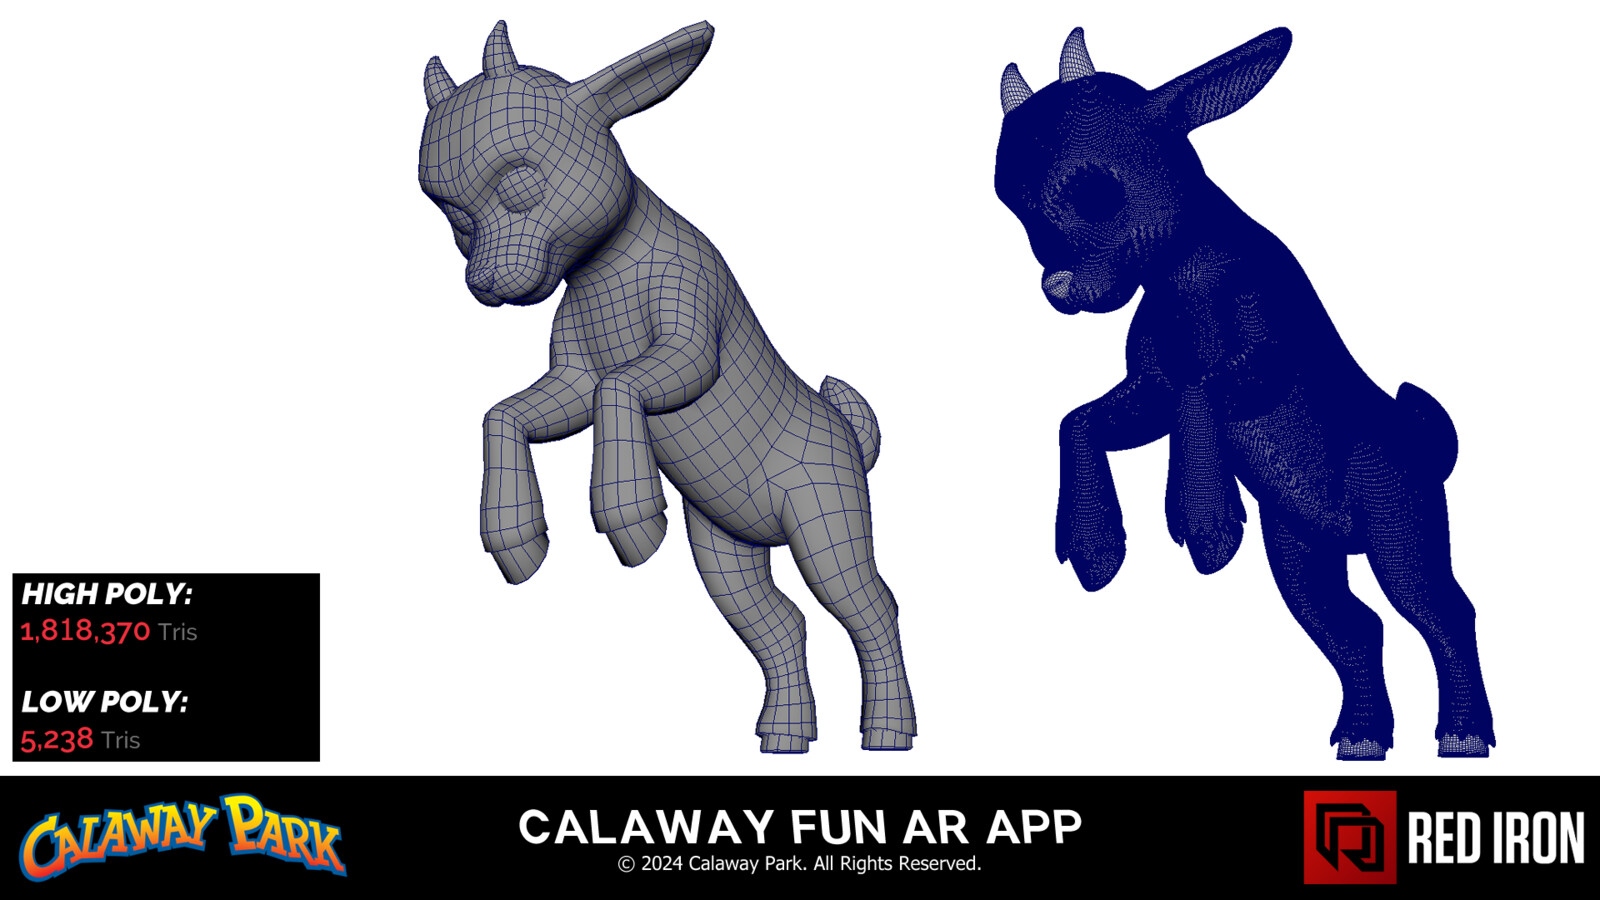 Wireframes and polycounts for high and low poly models.